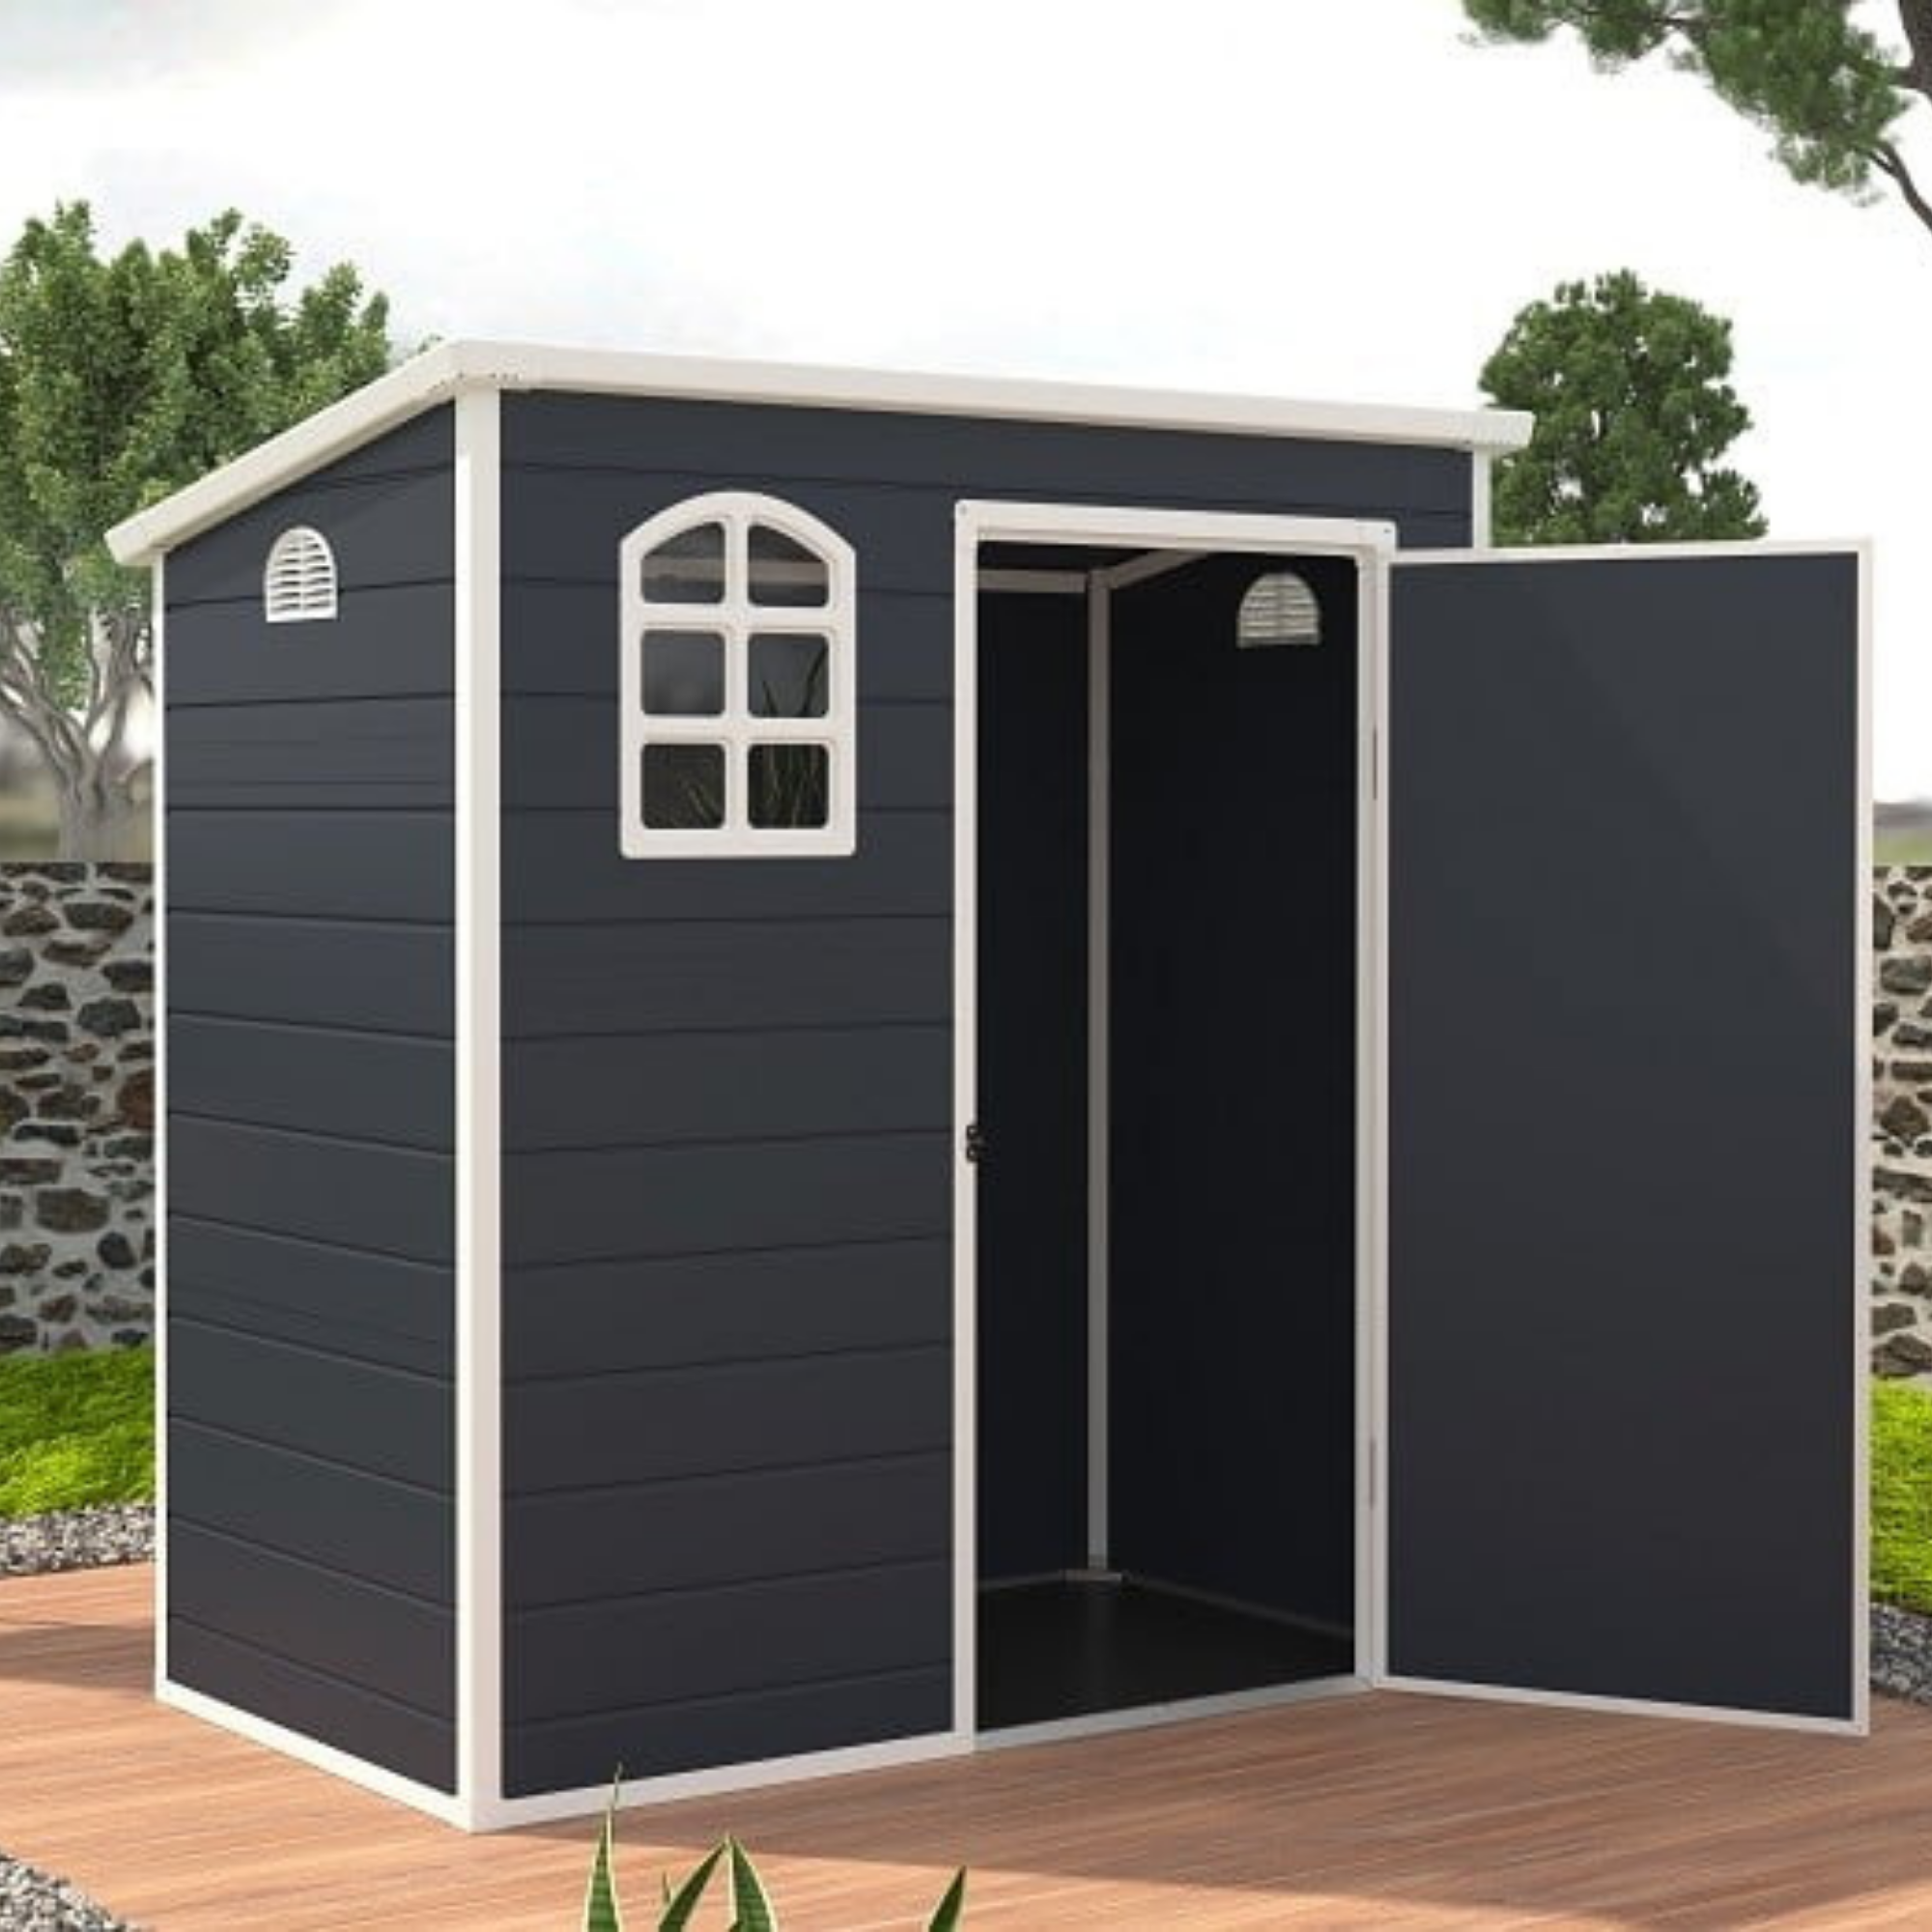 Jasmine 6x3 Plastic Pent Shed Ash Grey With Foundation Kit Jasmine 6x3 Plastic Pent Shed Ash Grey With Foundation Kit Beck A